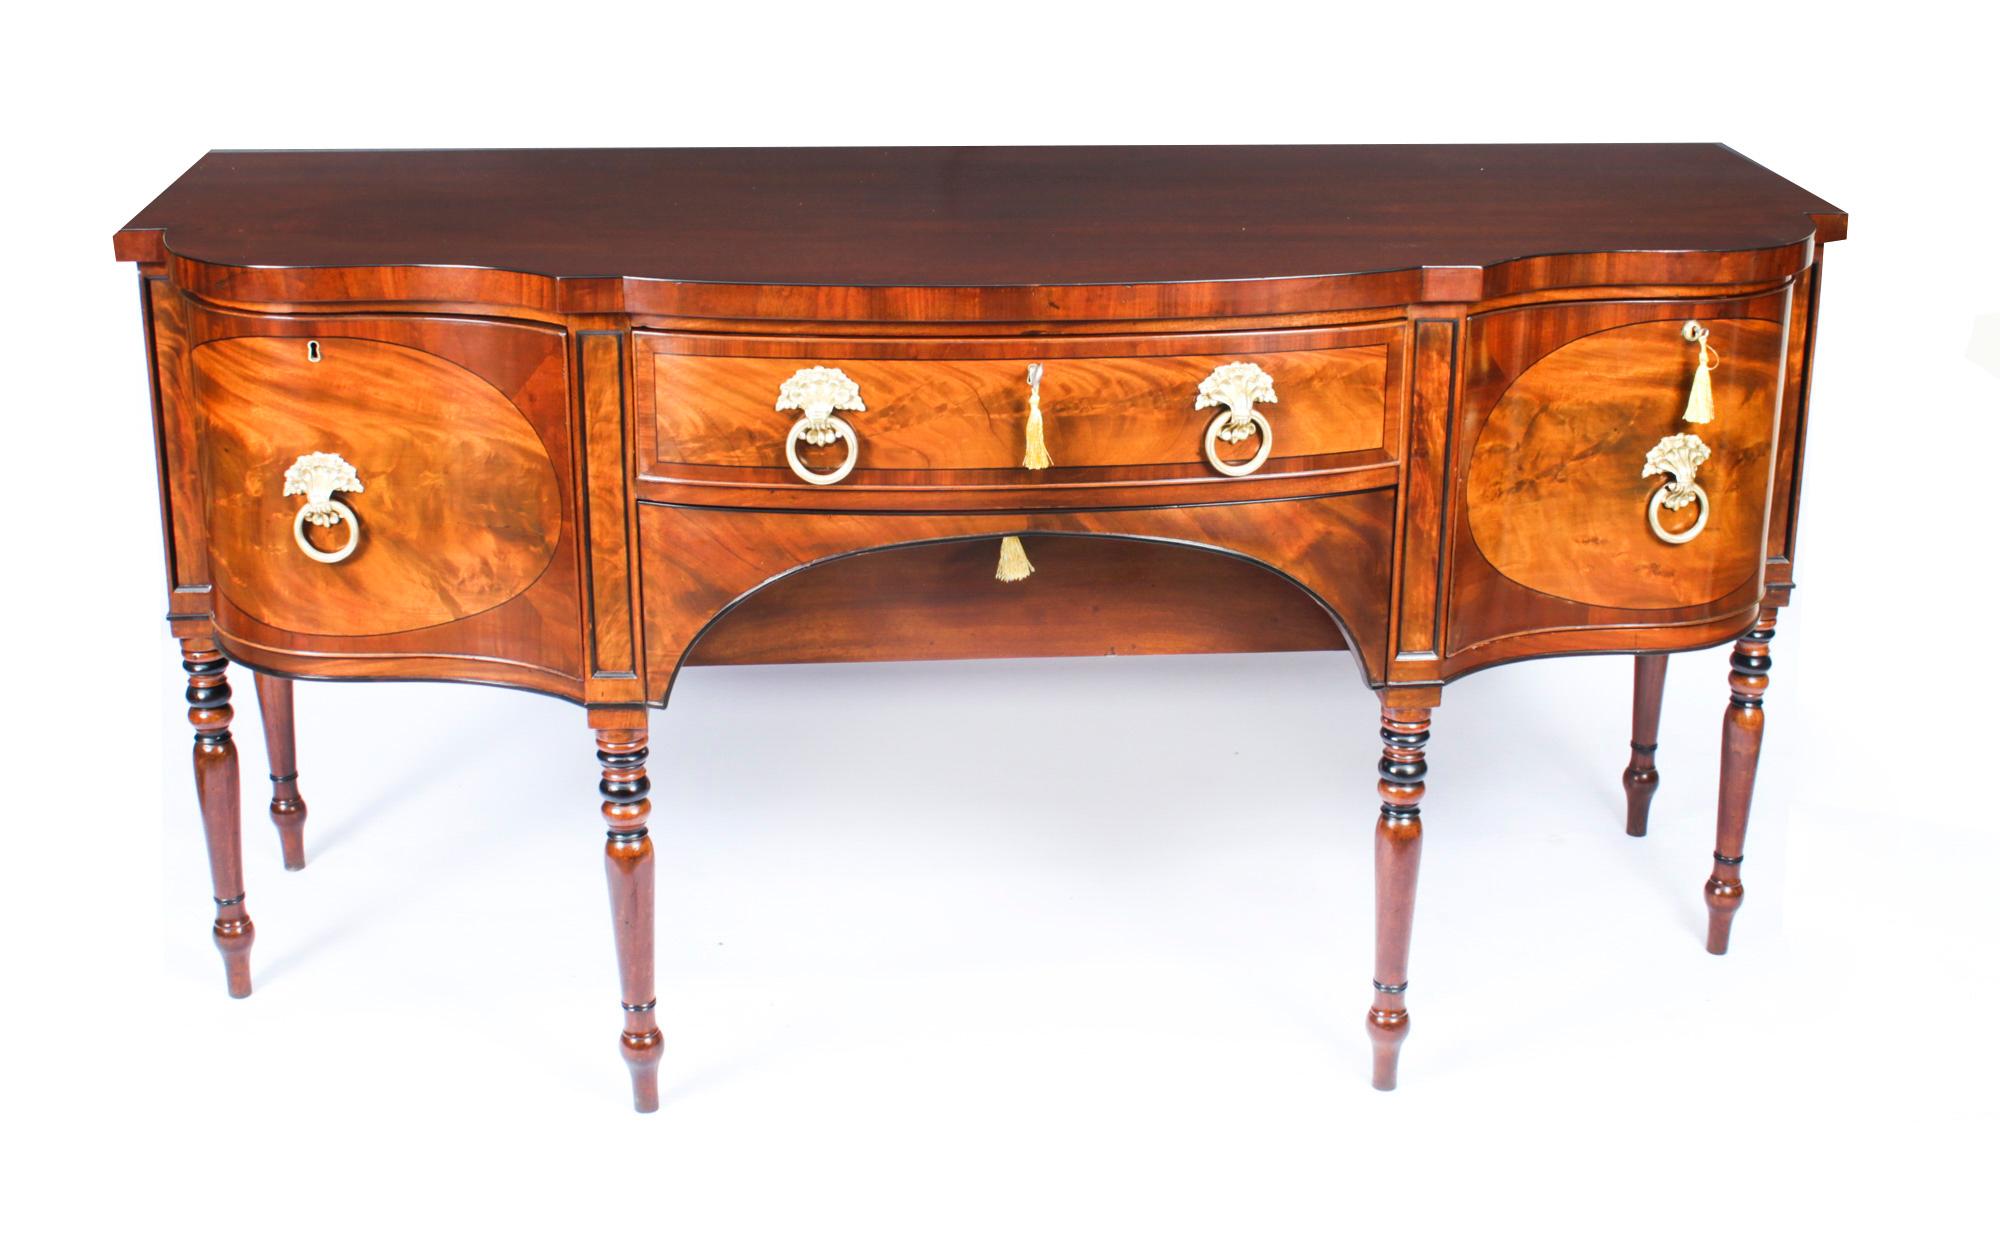 This is a superb antique English Regency flame mahogany shaped serpentine bowfront sideboard, Circa 1820 in date.

It is crossbanded, bordered with ebony lines and fitted with a central frieze drawer above a recessed arched apron drawer. It is